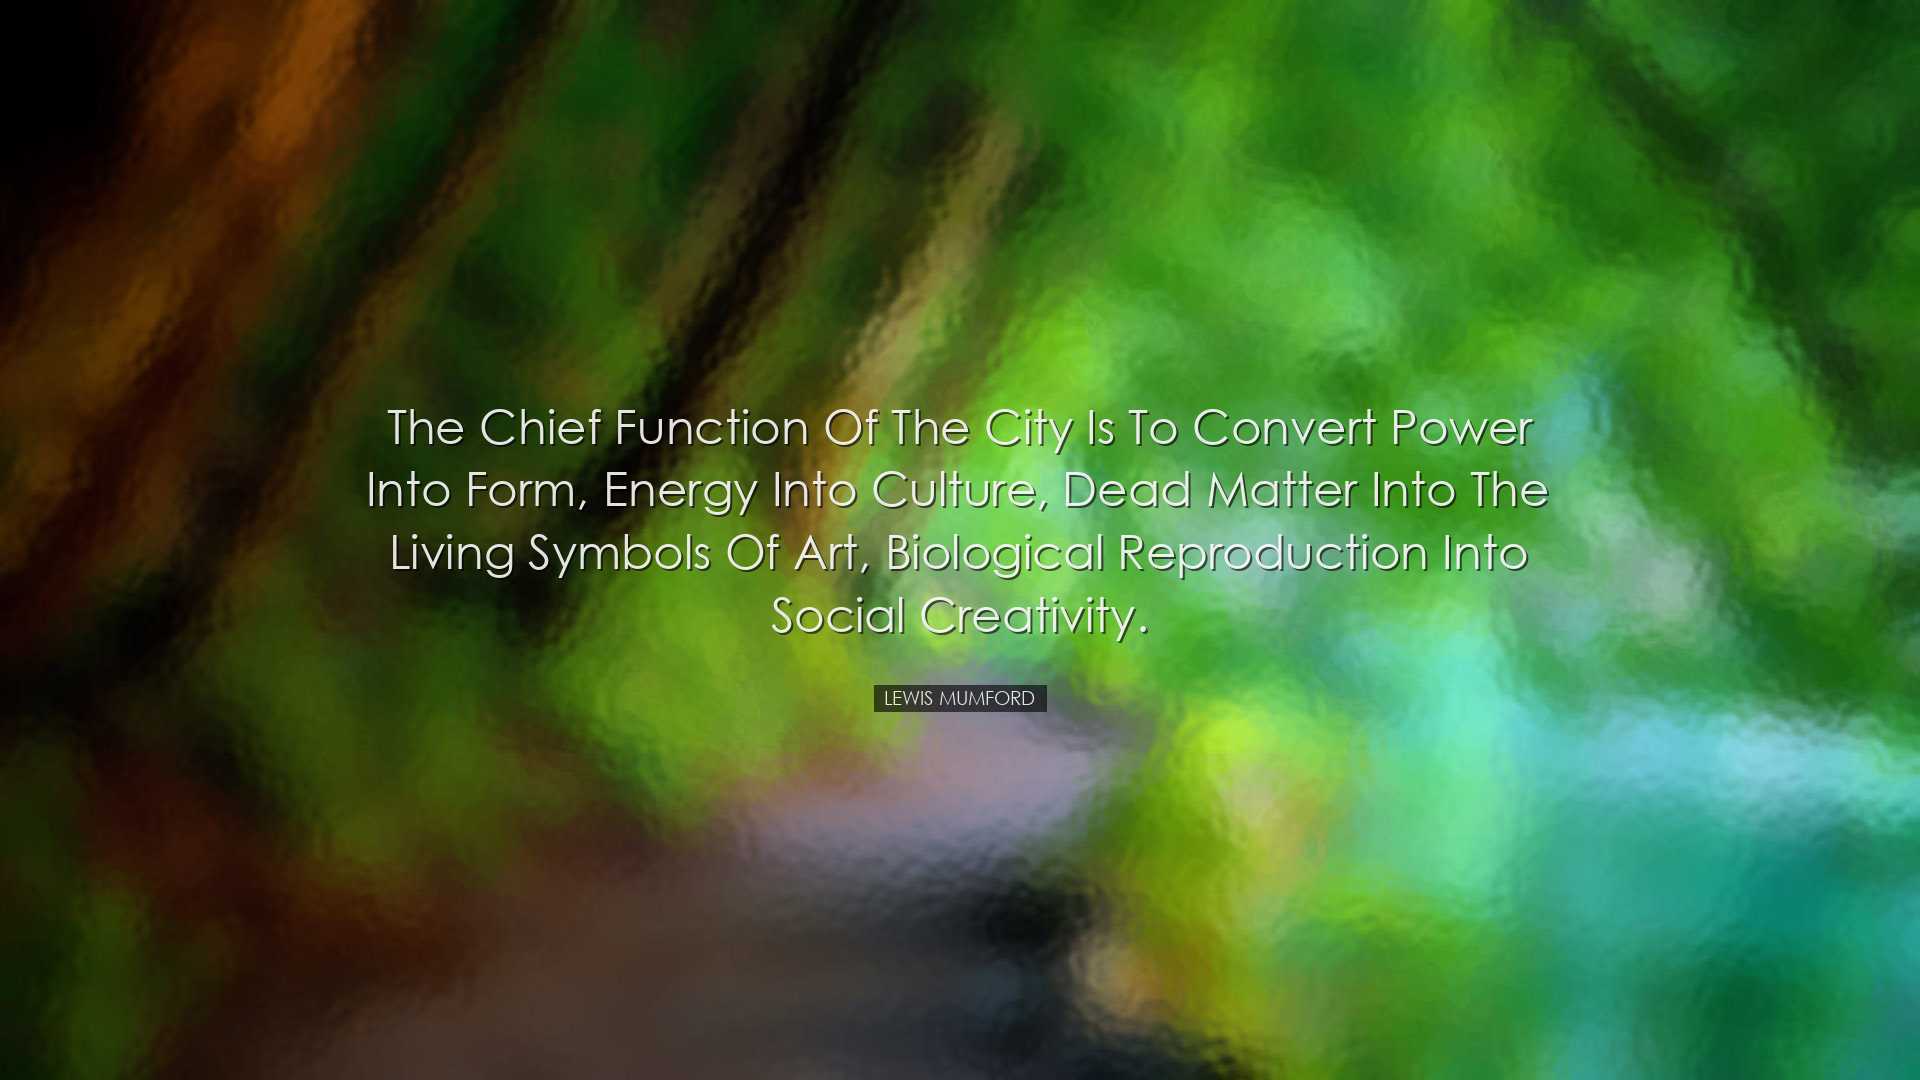 The chief function of the city is to convert power into form, ener